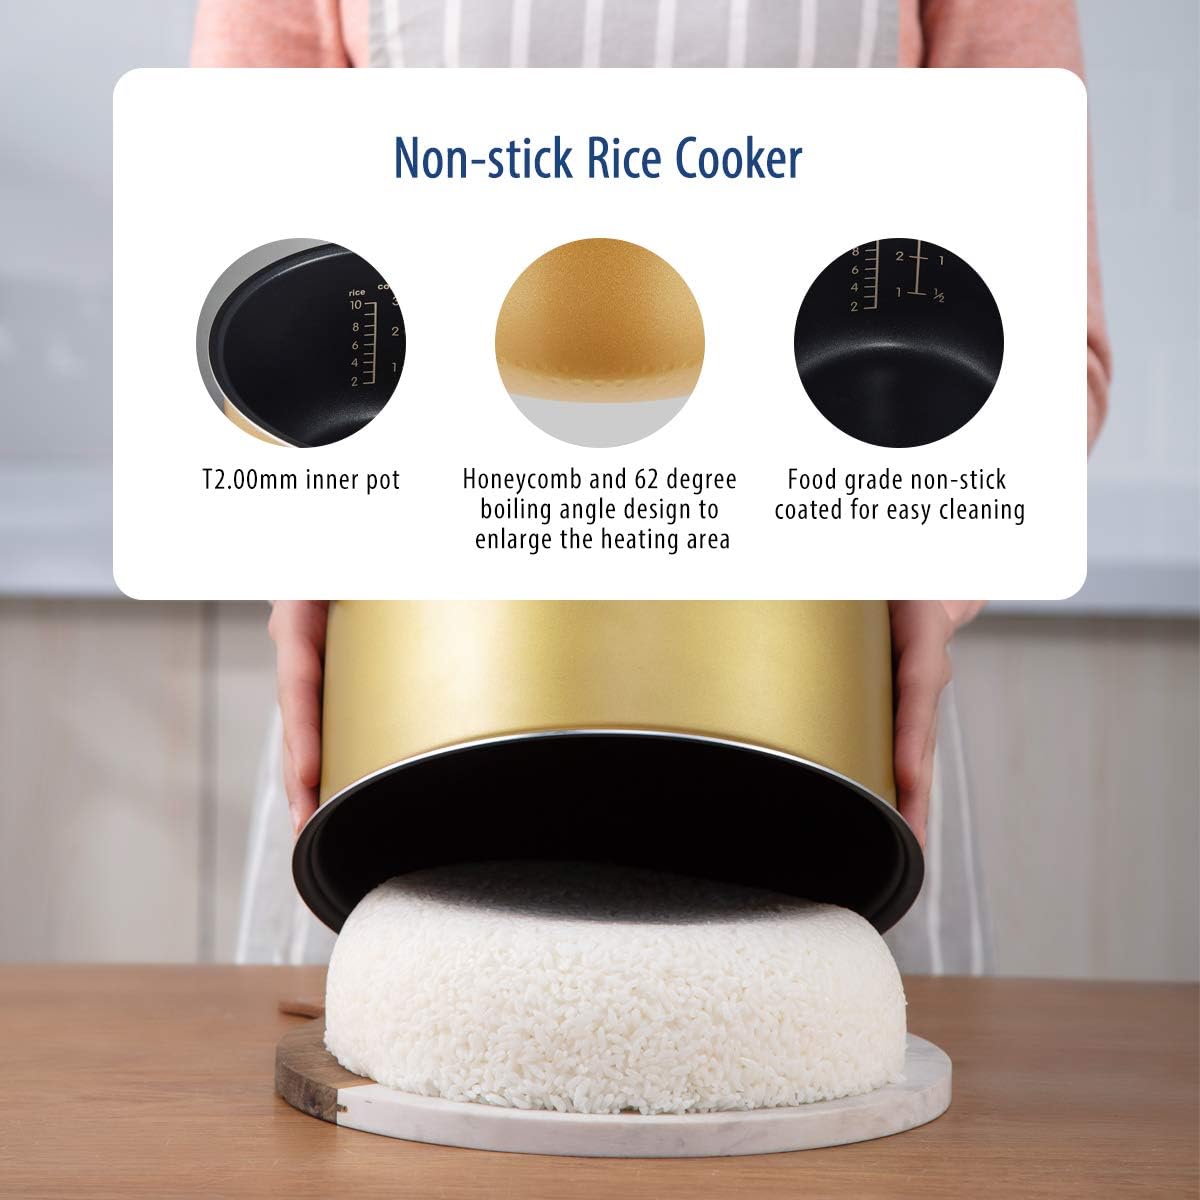 https://bigbigmart.com/wp-content/uploads/2023/08/COMFEE-Rice-Cooker-Asian-Style-Large-Rice-Cooker-with-Fuzzy-Logic-Technology-11-Presets-10-Cup-Uncooked-20-Cup-Cooked-Auto-Keep-Warm-24-Hr-Delay-Timer6.jpg